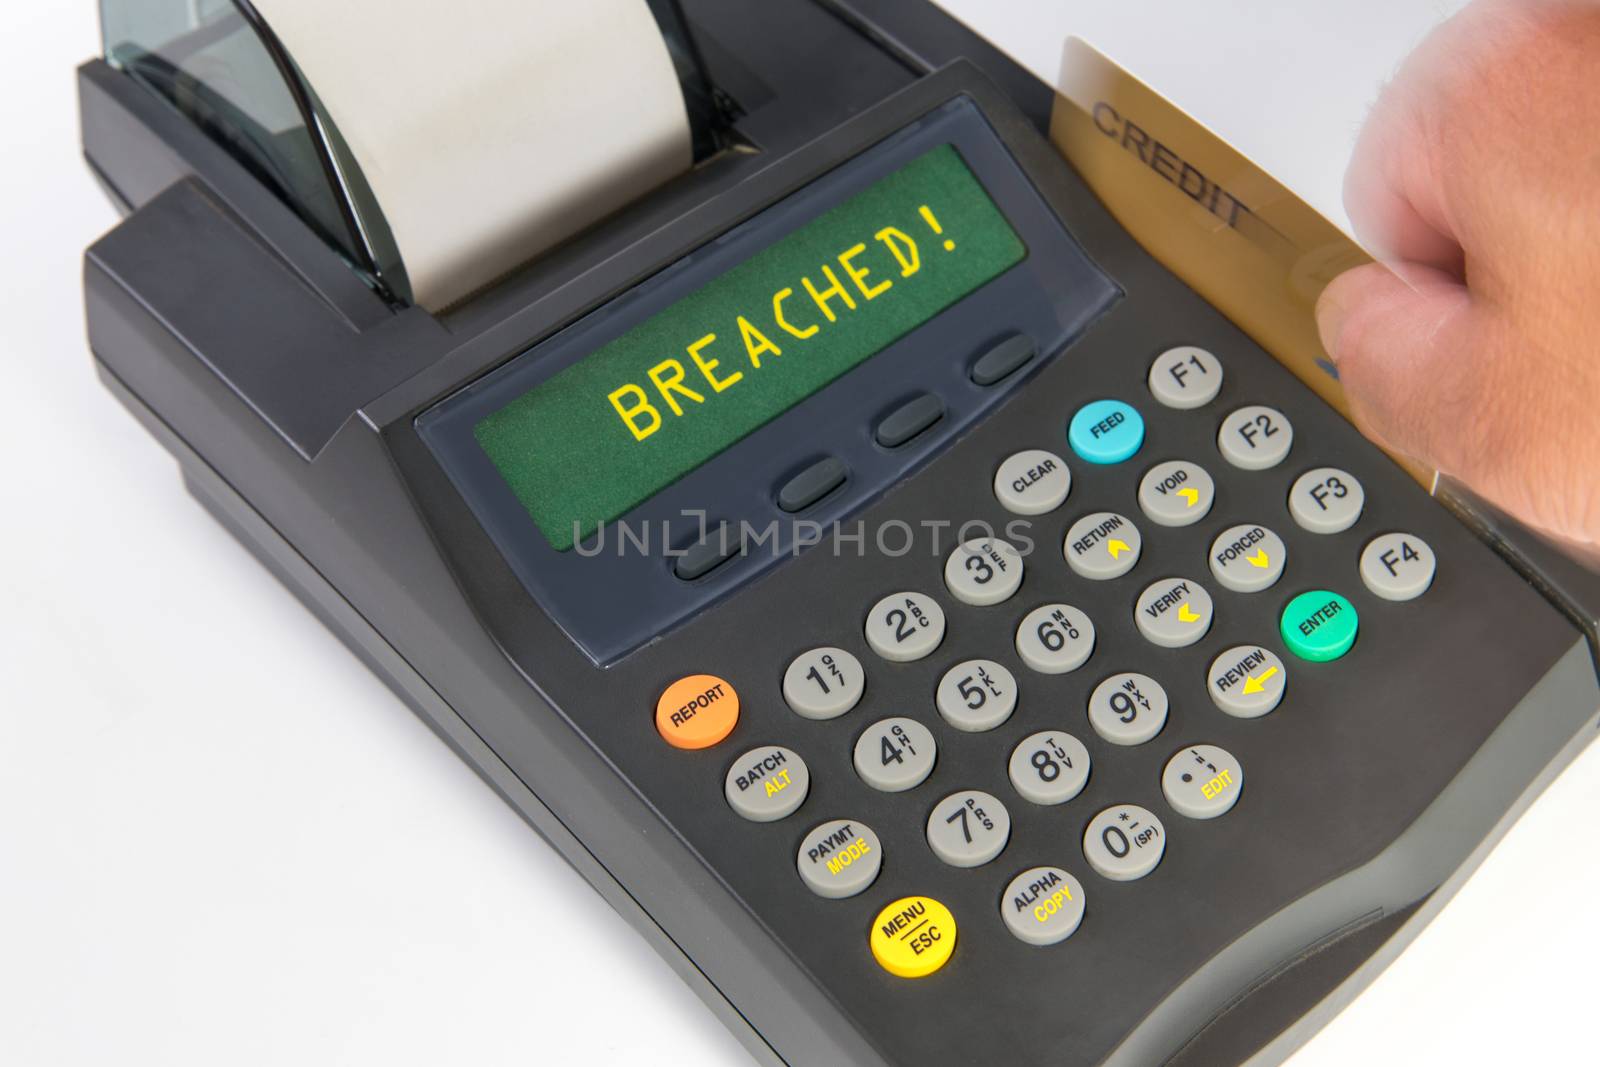 Debit/Credit payment terminal being used to processing a payment but displaying "breached" instead. by blegate